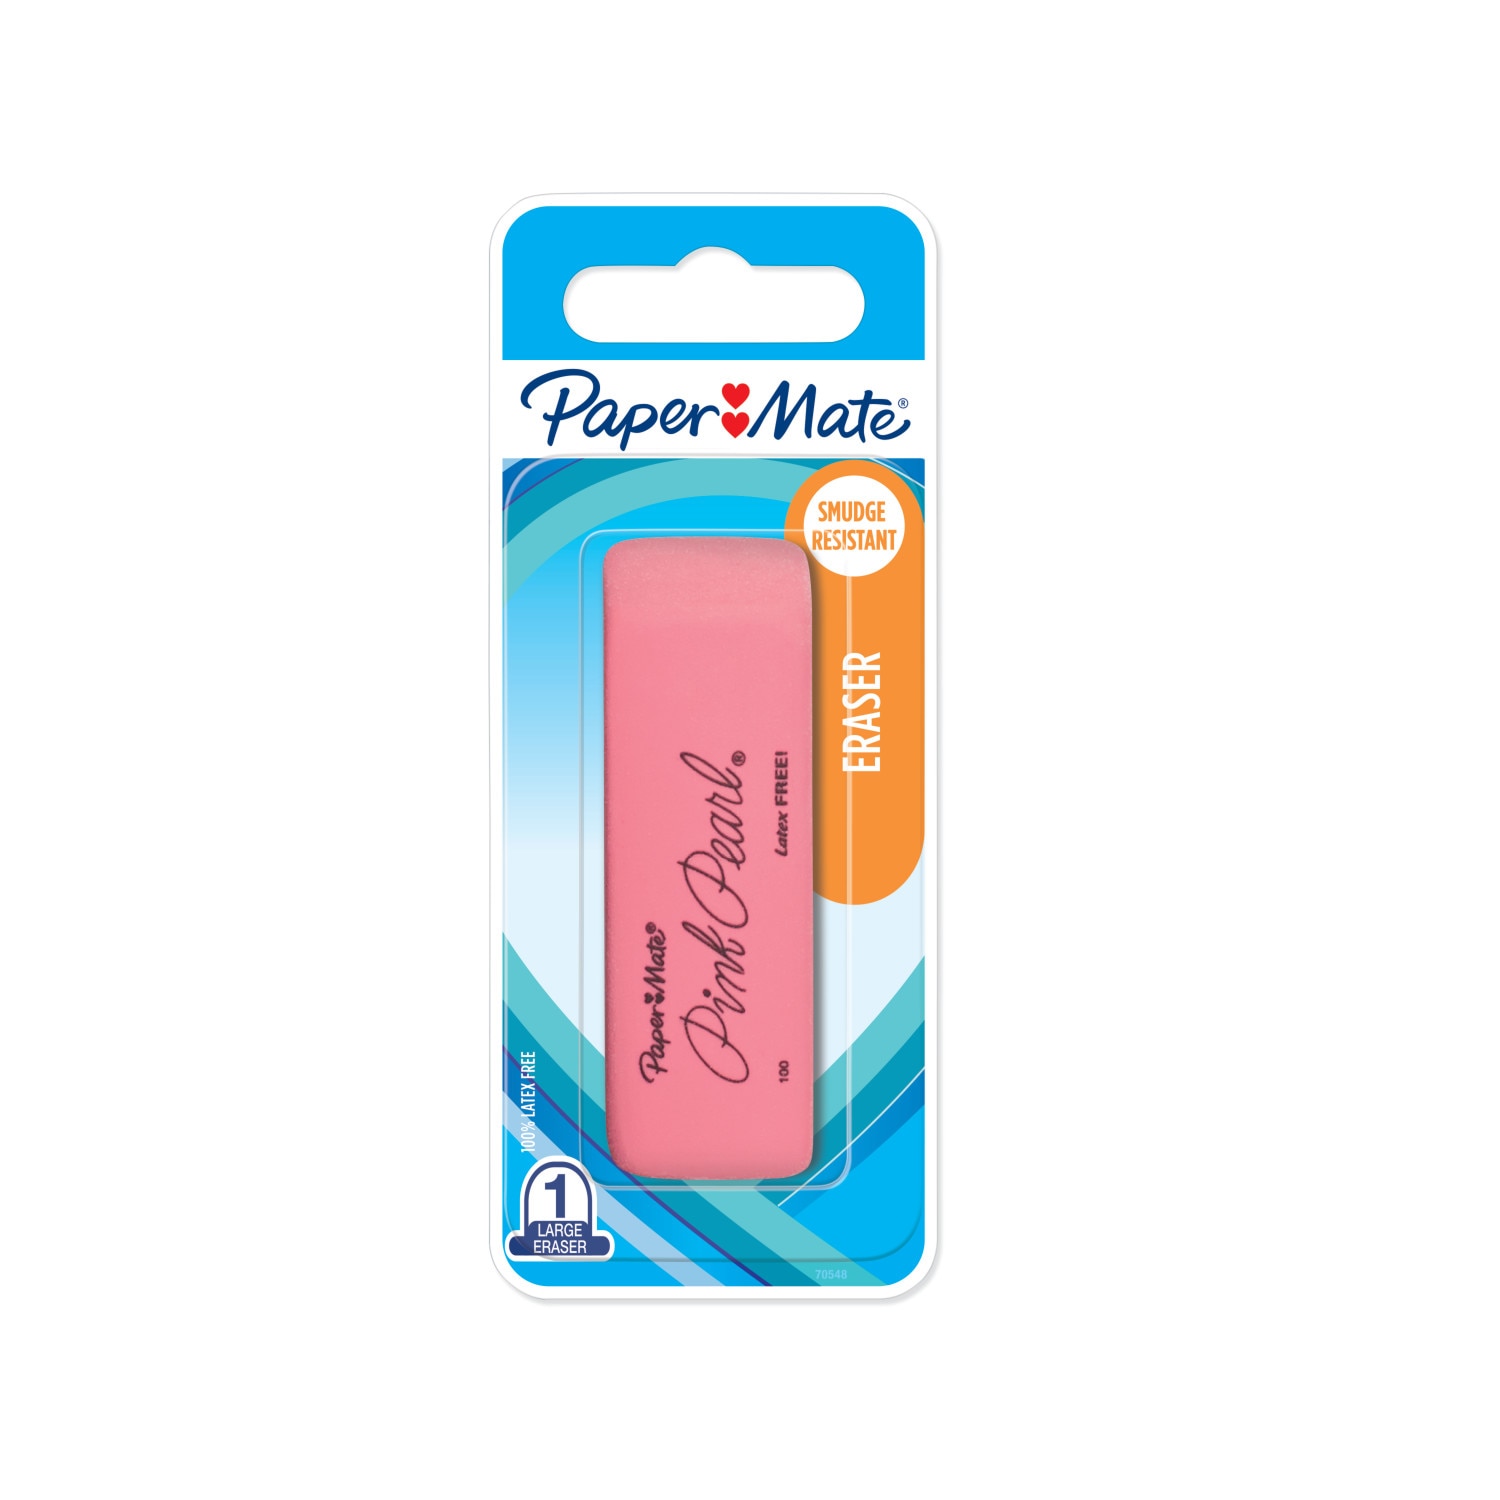 Paper Mate Pink Pearl Eraser, Large, Carded Packaging